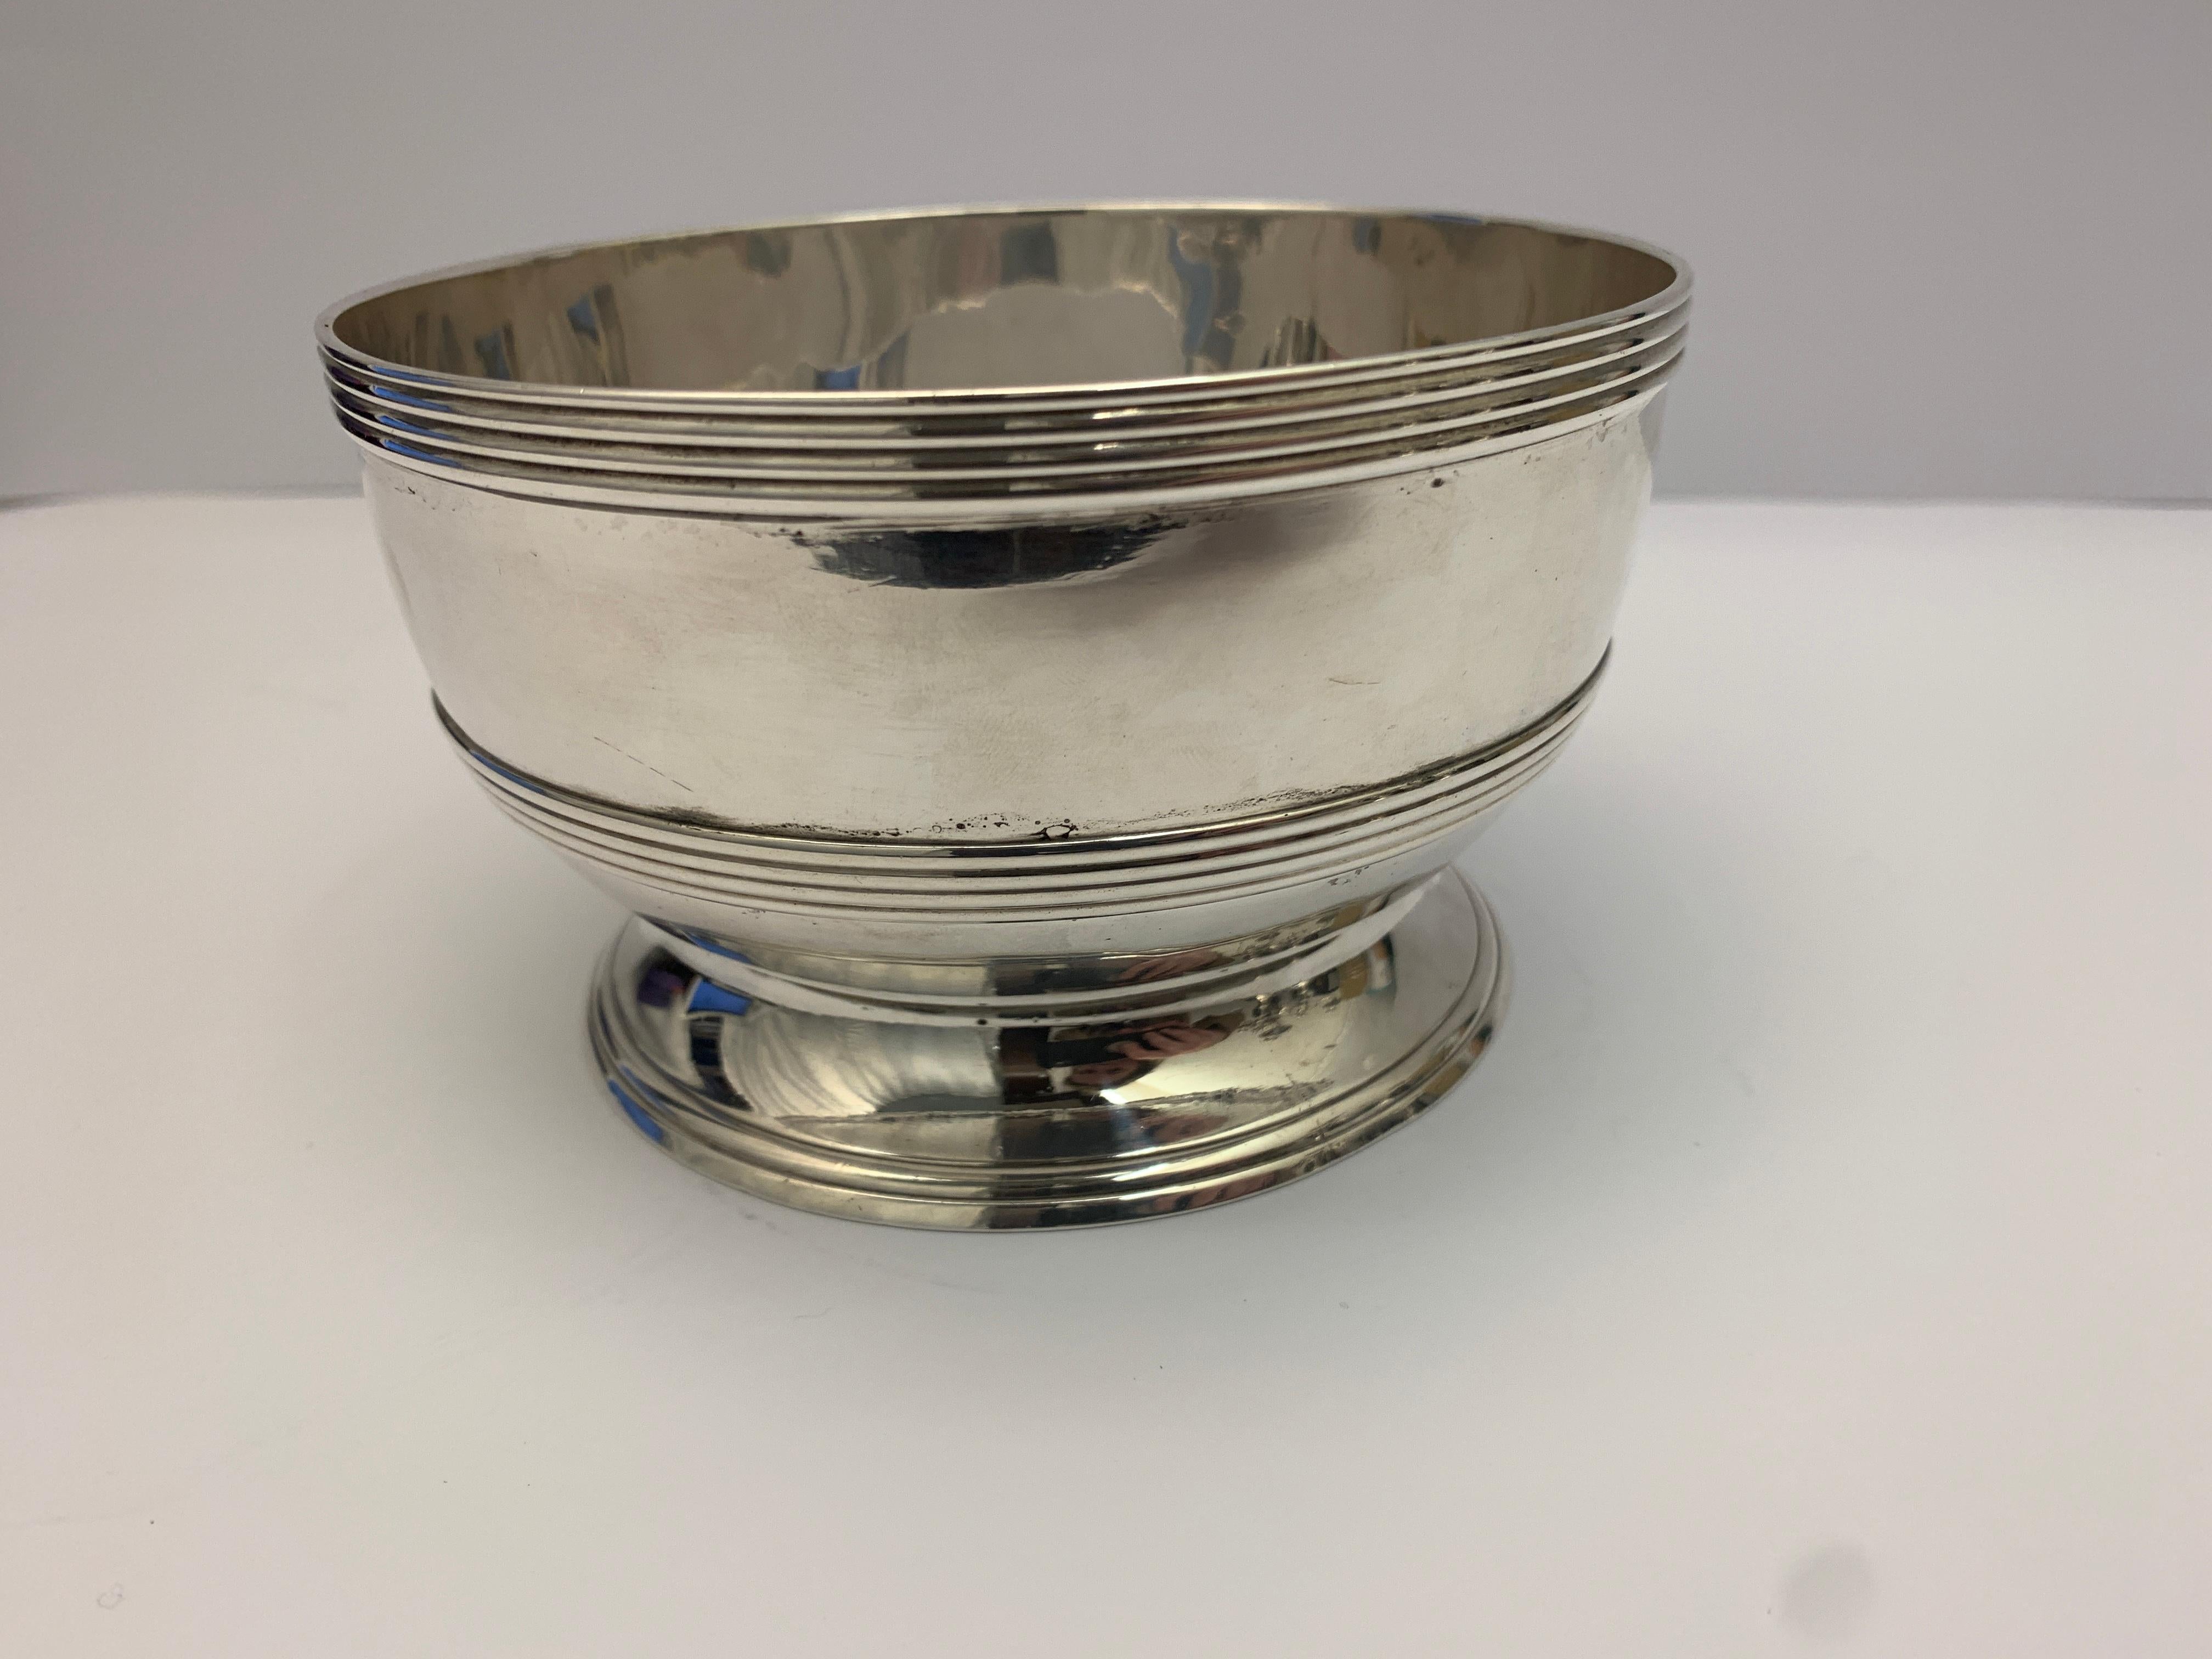 An antique silver bowl of simple design. Made in 1810 by Peter and William Bateman.